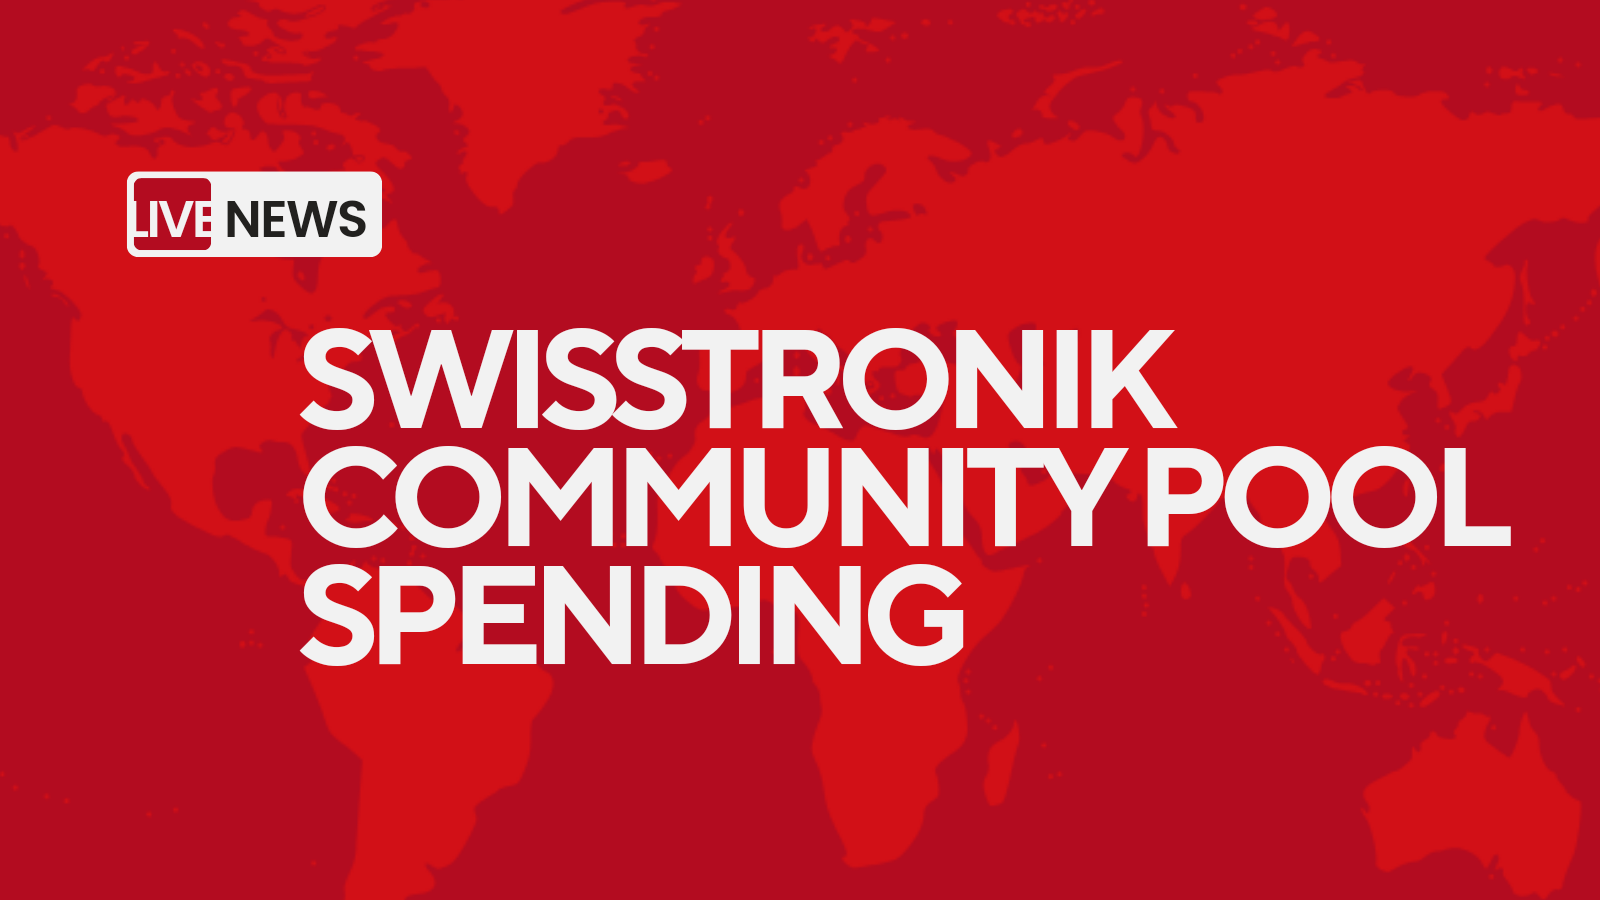 Swisstronik : Managing Community Pool Spending with Transparency and E